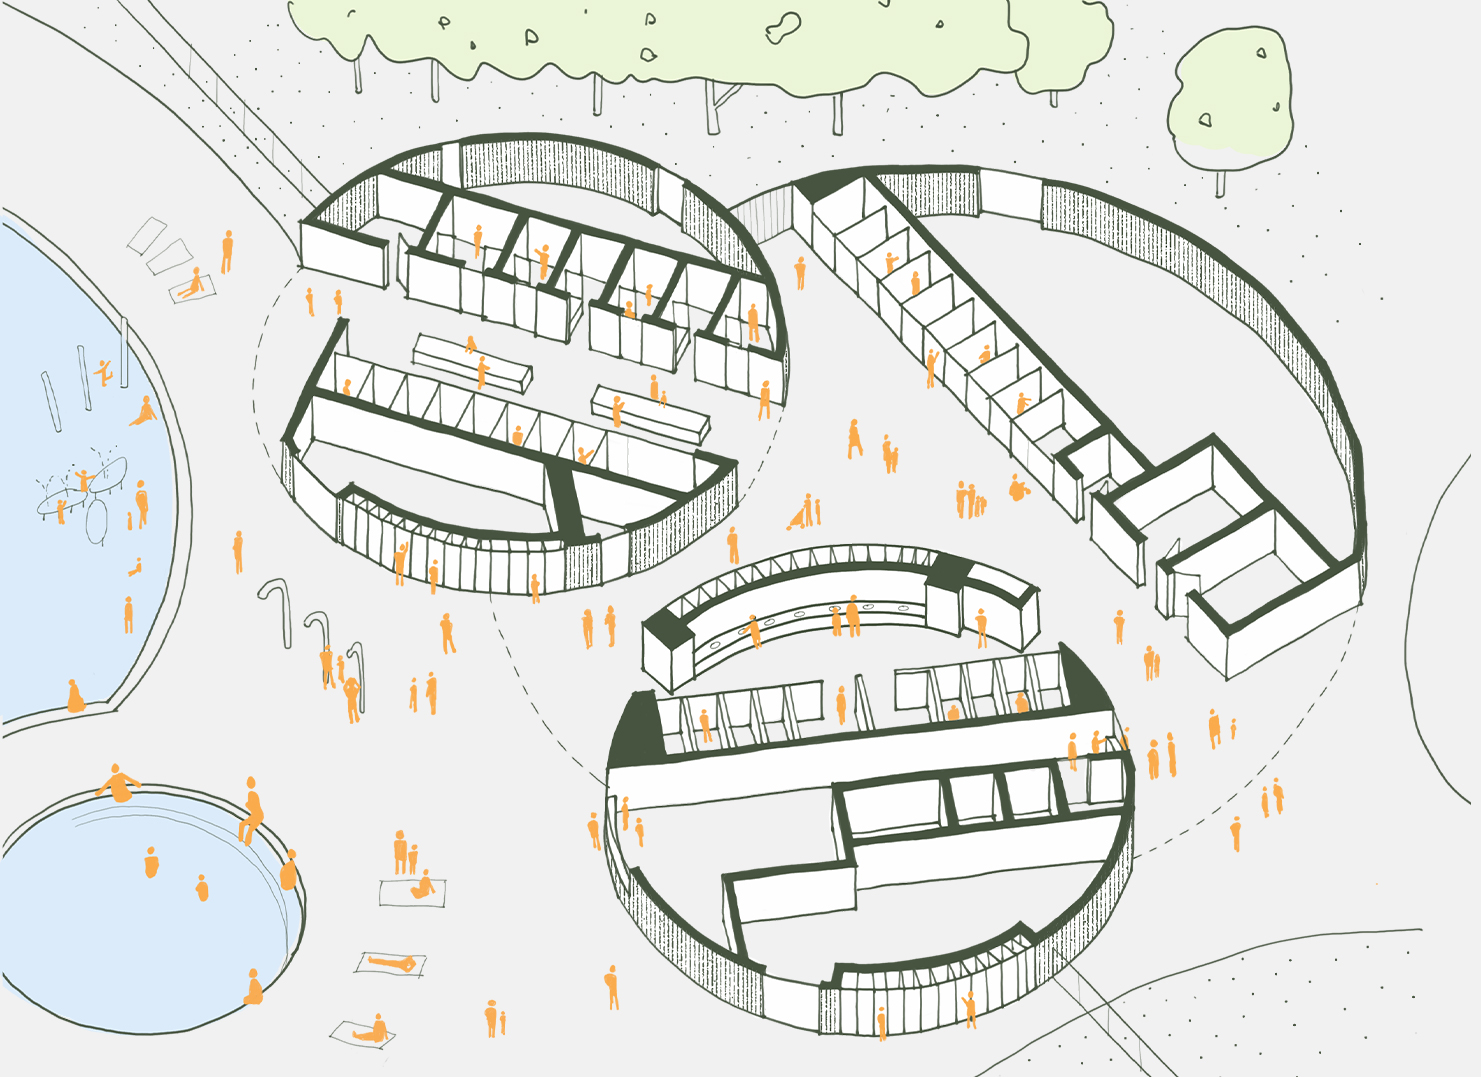 An axonometric sketch of the circular change facilities. Little orange figures populate the sketch.